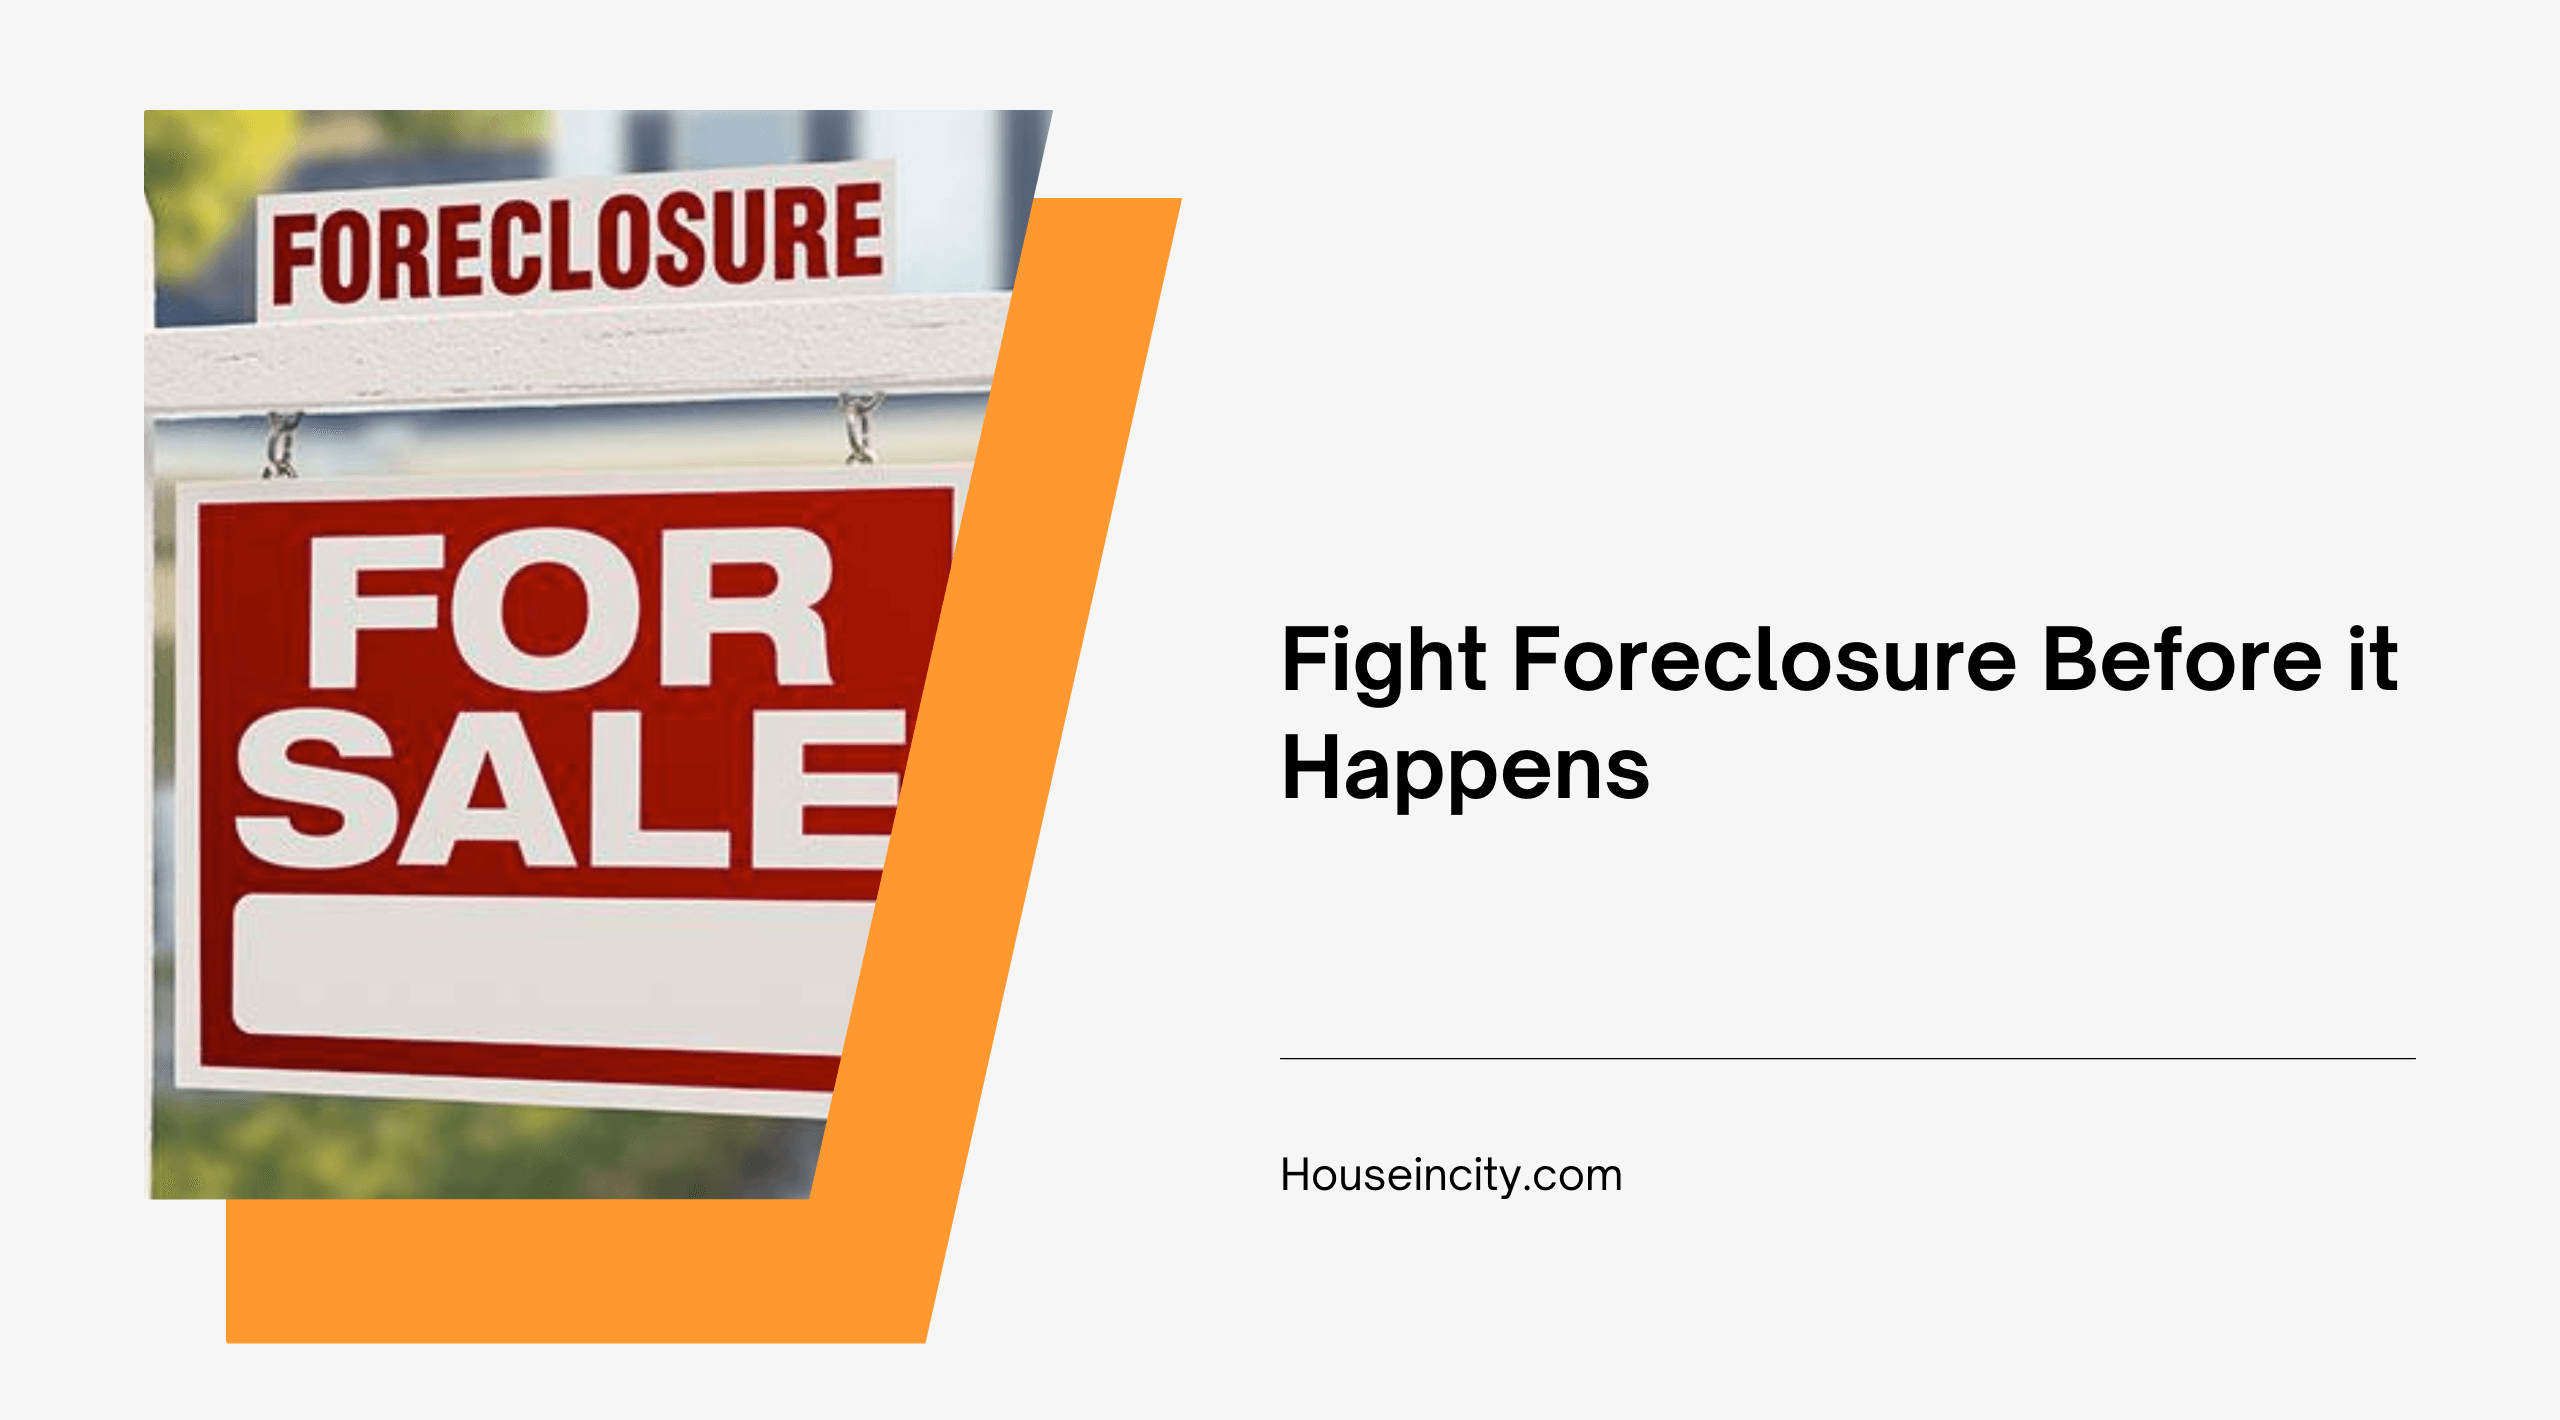 Fight Foreclosure Before it Happens